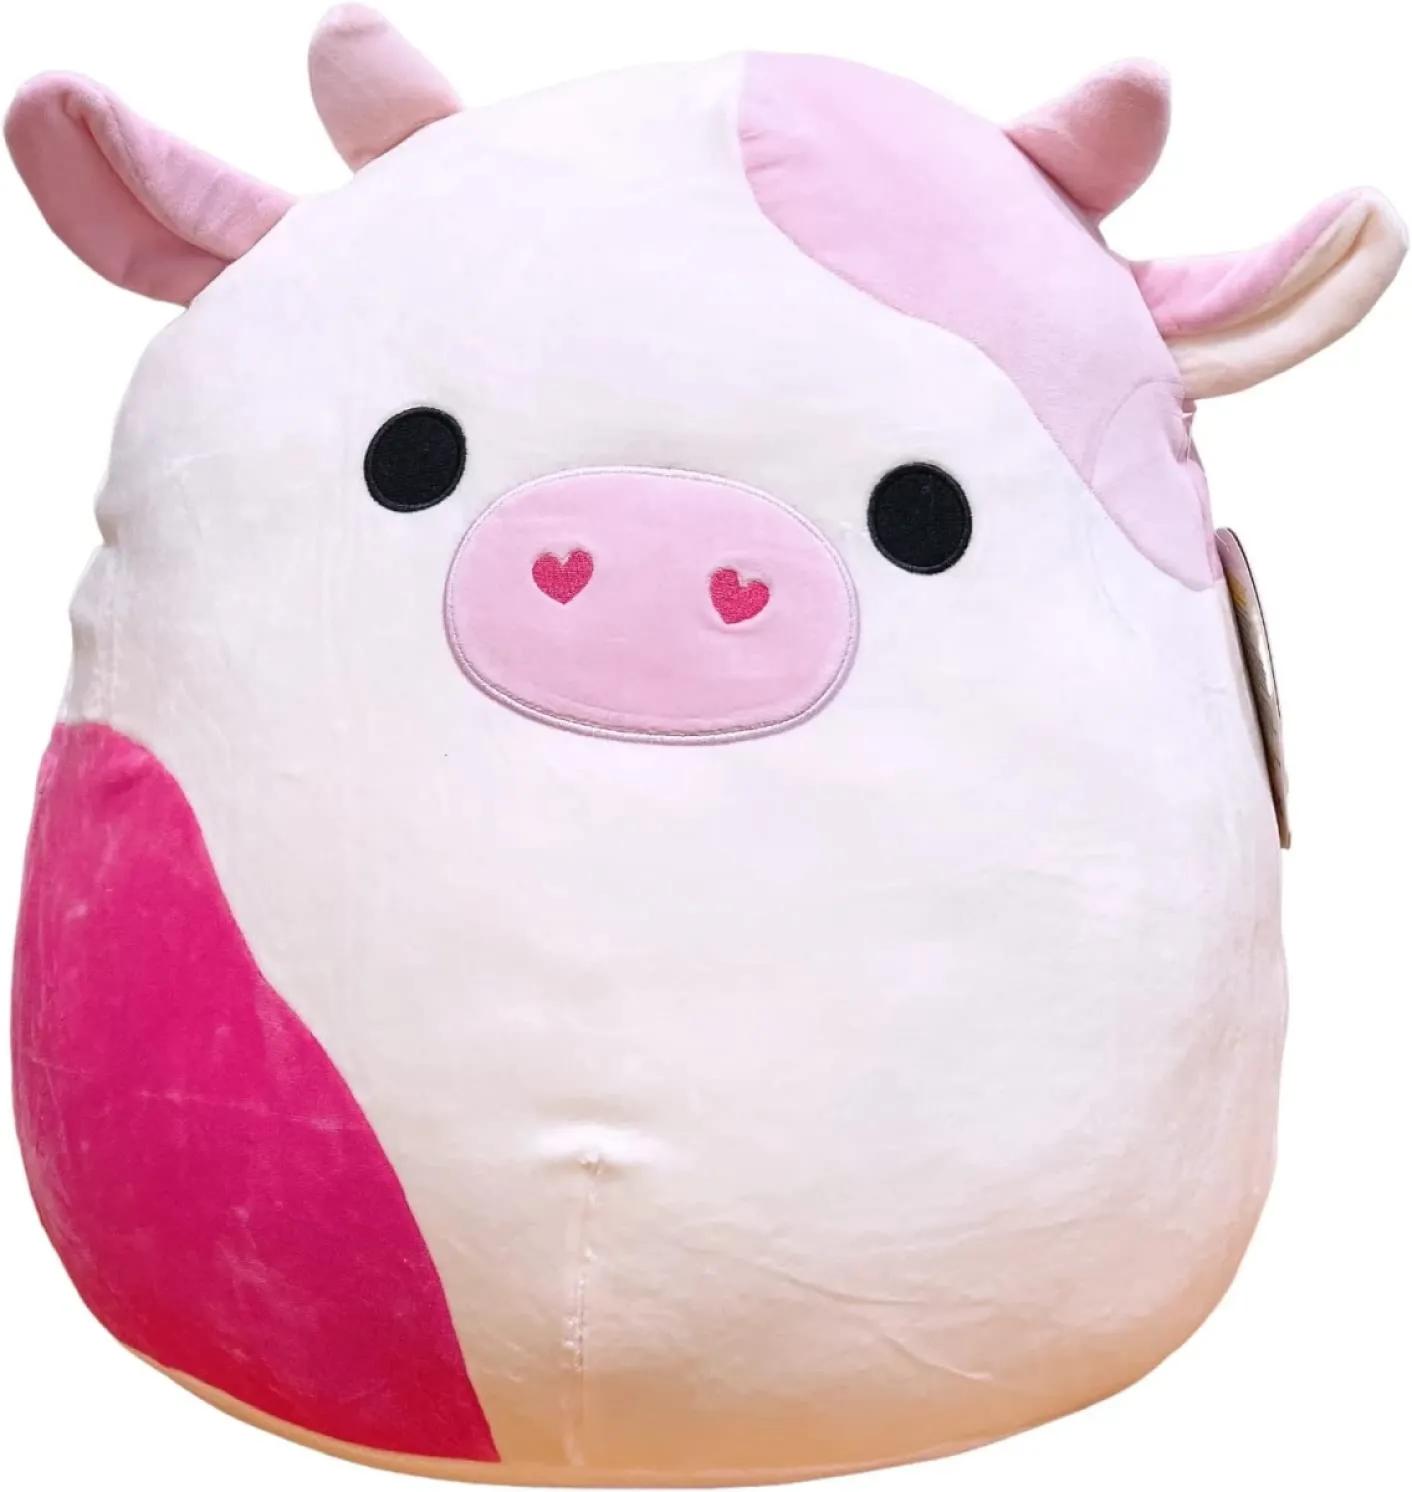 A three tone pink cow Squishmallow with heart shaped nostrils